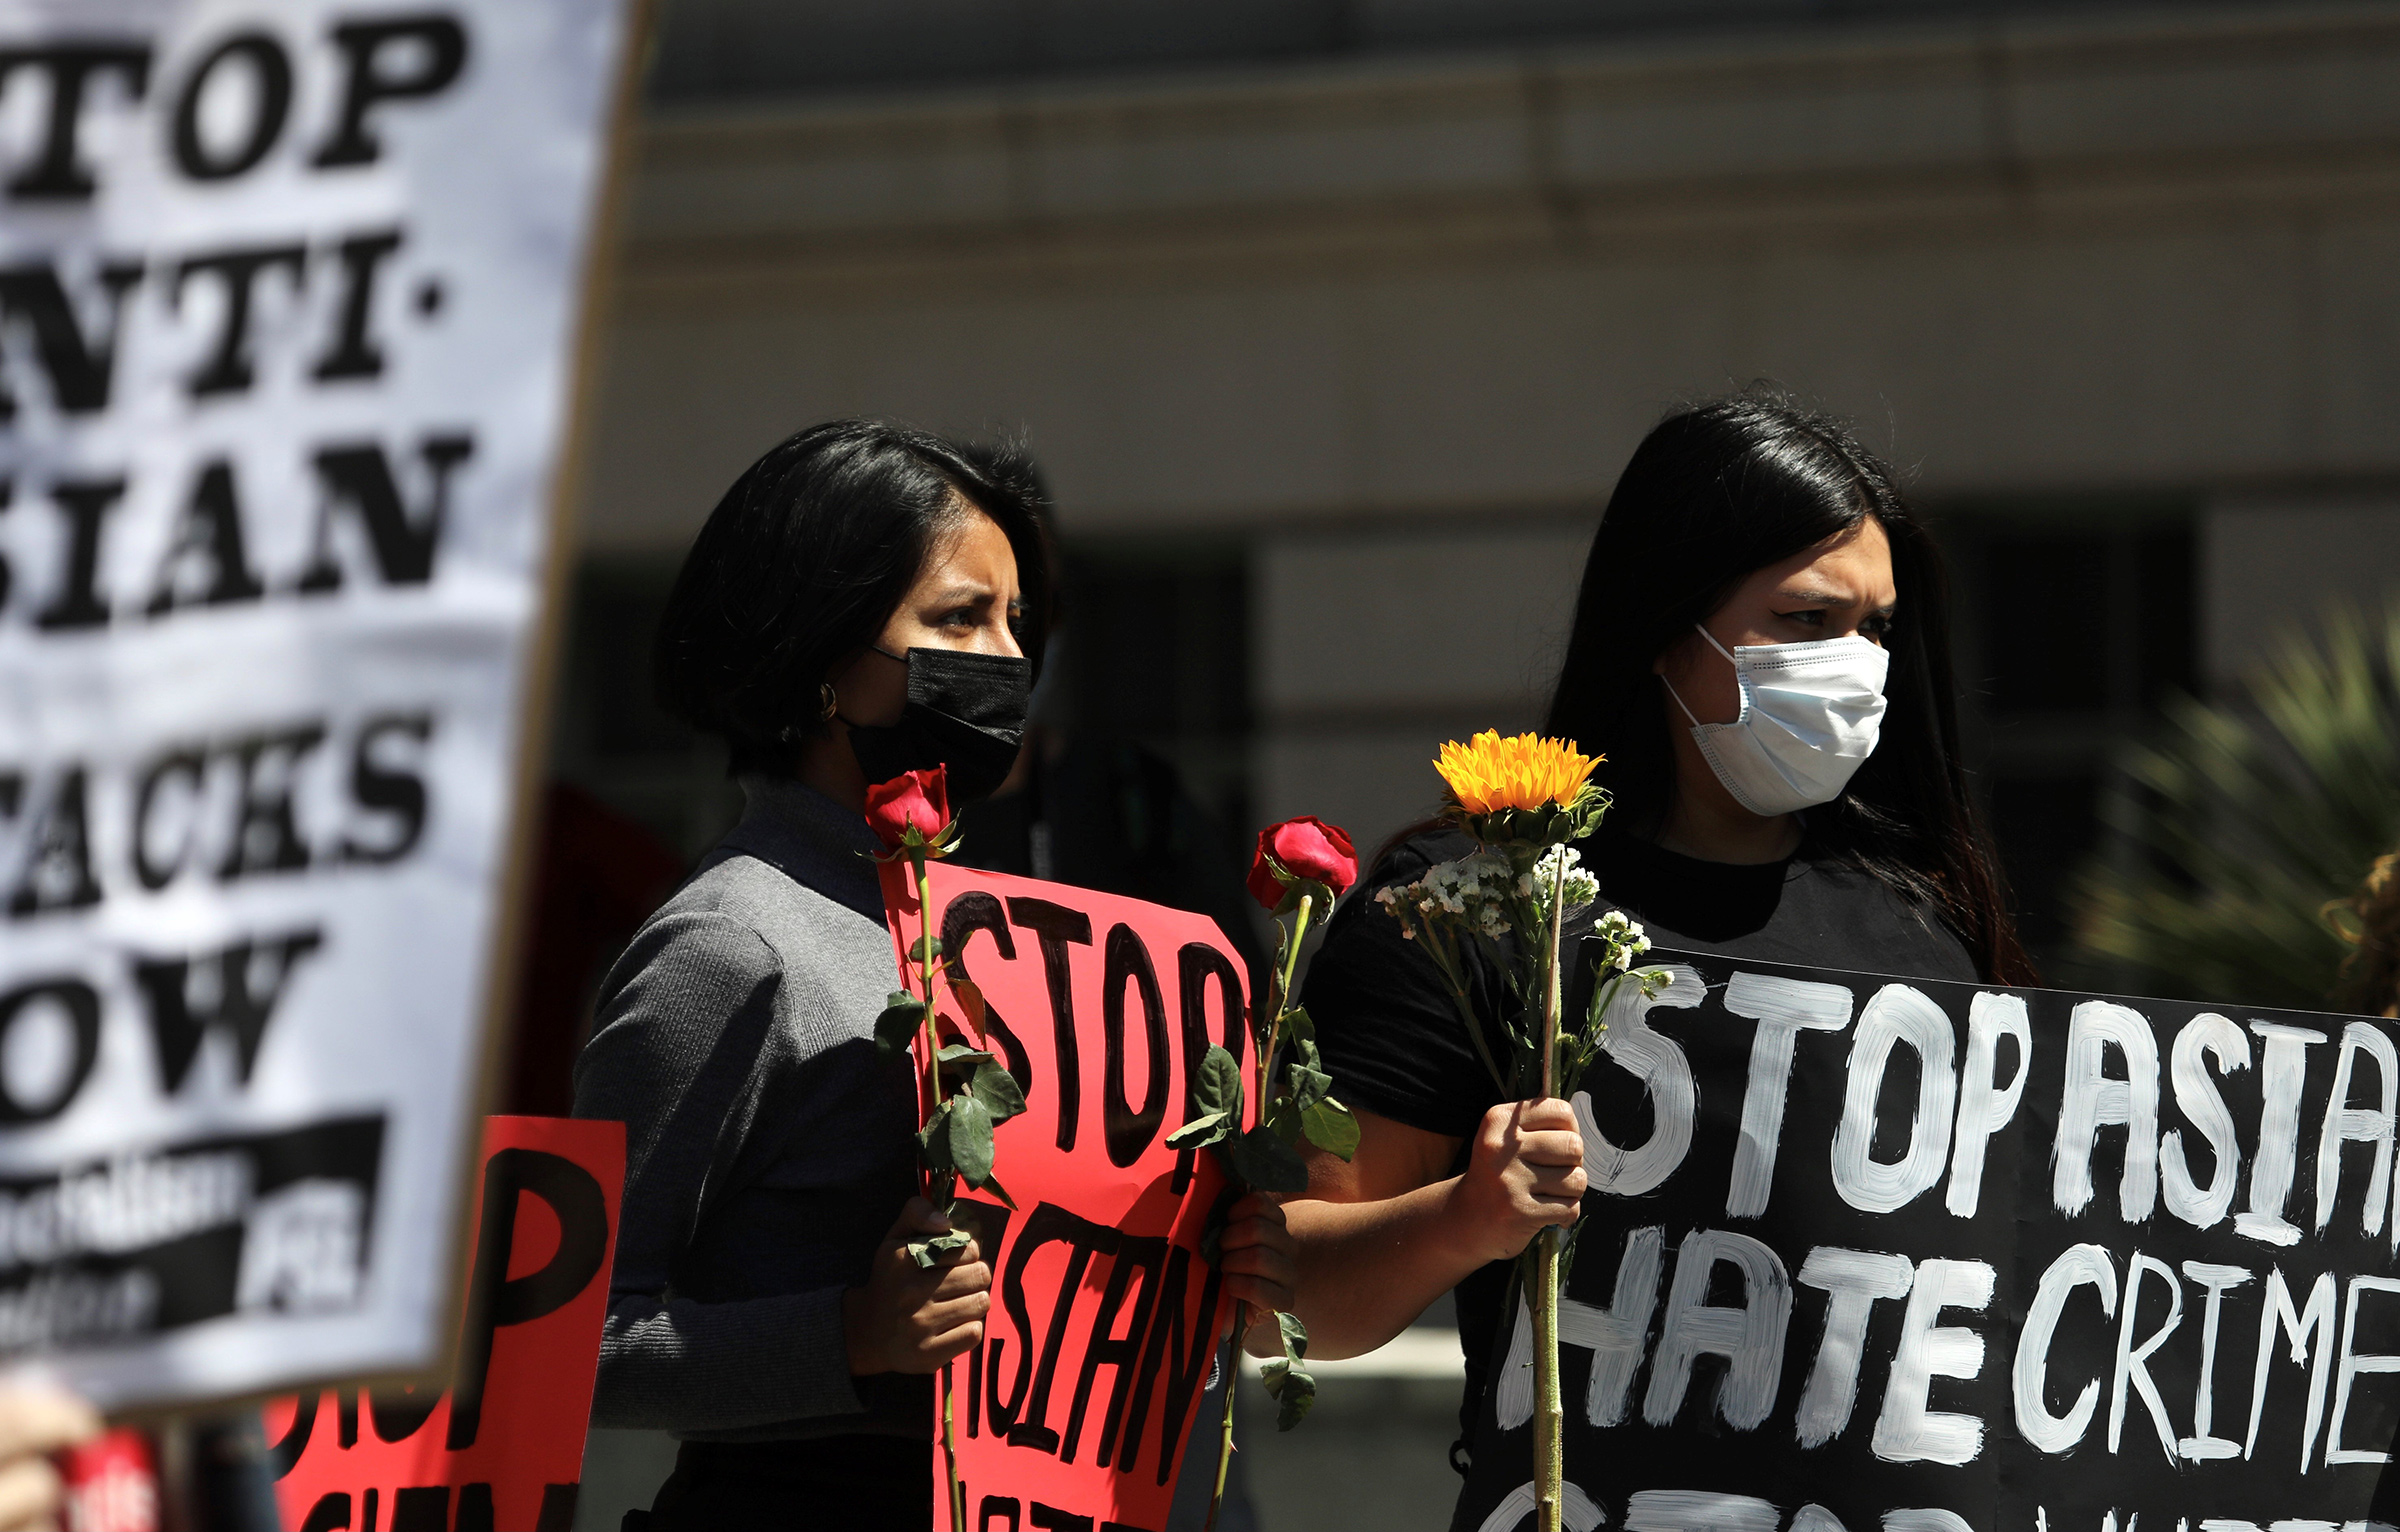 People participate in a Stop Asian Hate rally and march at City Hall in Los Angeles, on March 27, 2021.